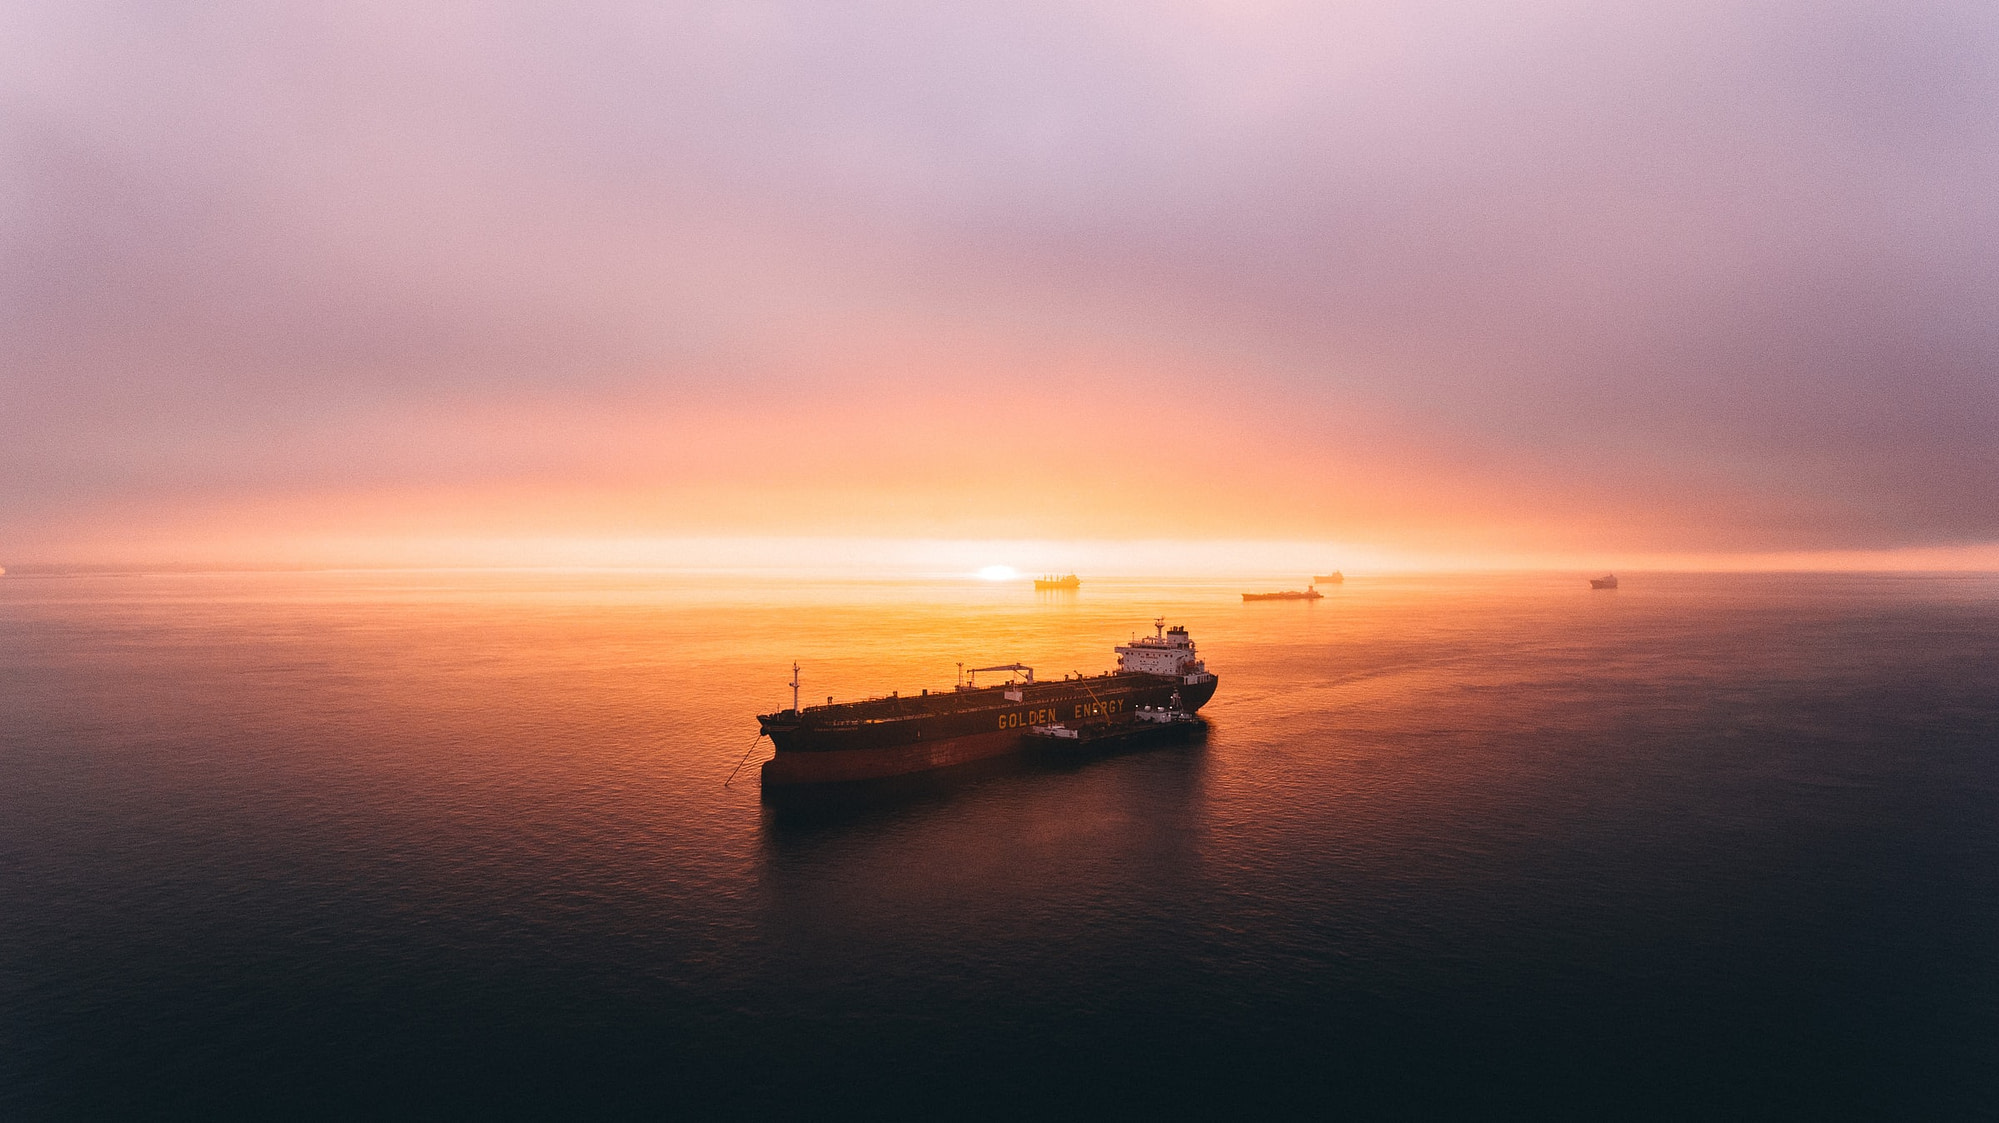 Only 35% of Shipping Giants Aim To Be Zero Carbon | ATO Shipping NL